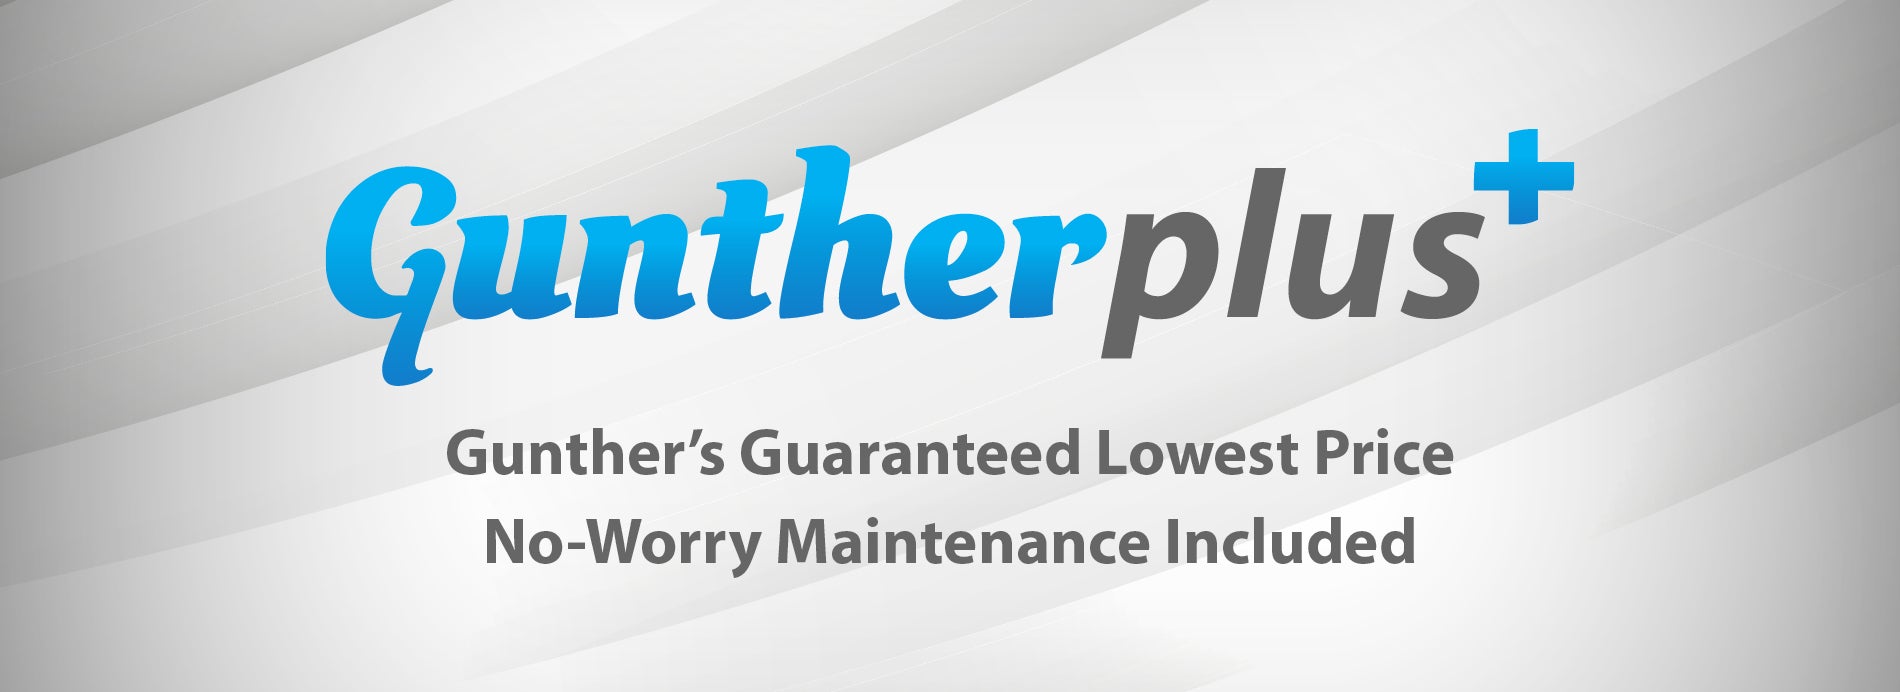 Gunther Plus. Gunther’s guaranteed lowest price, no-worry maintenance included.